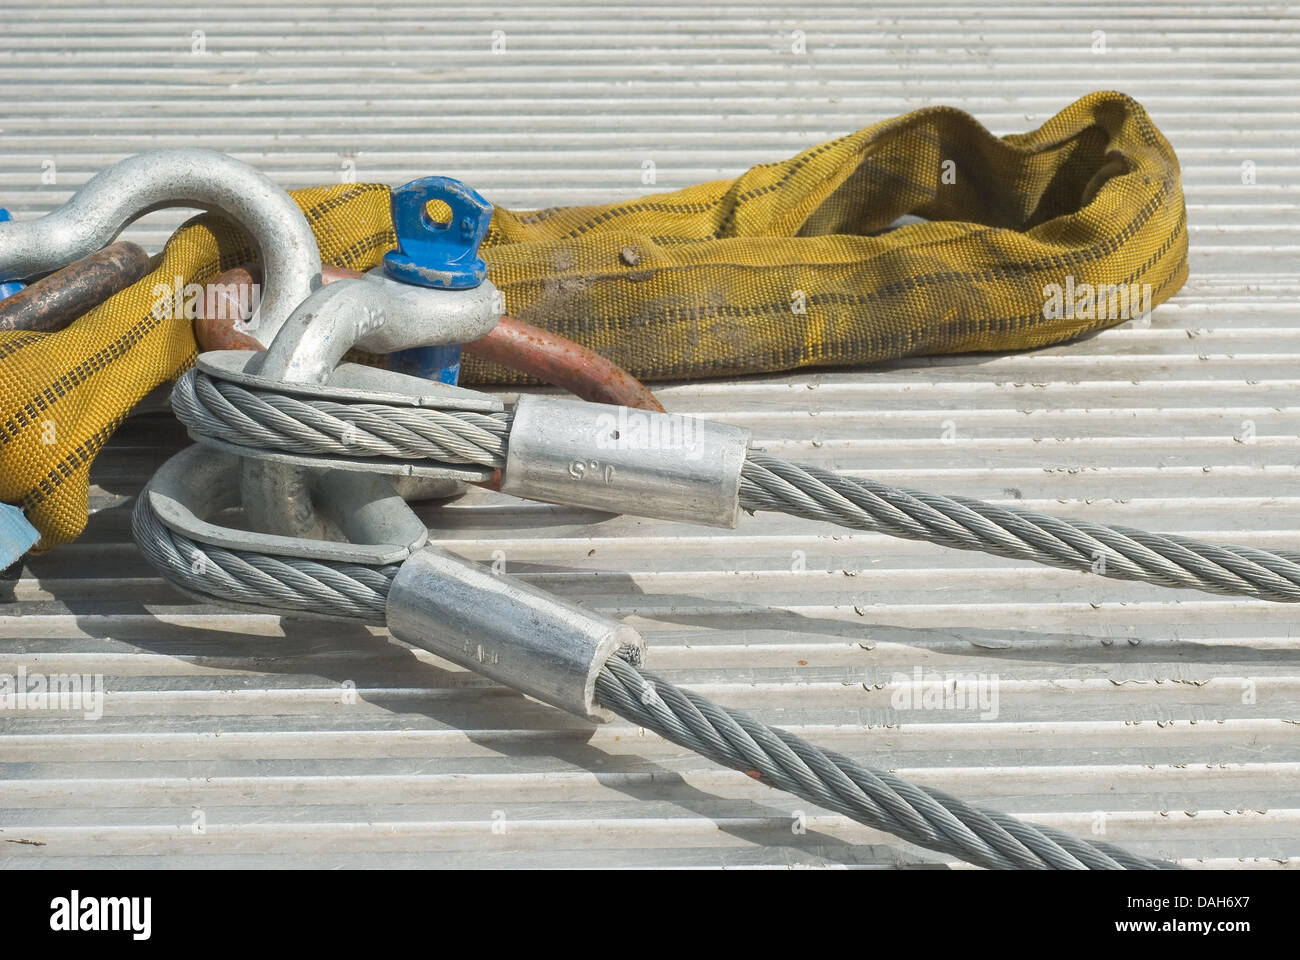 Industrial Cable with Shackle as Construction Site Equipment Stock Photo